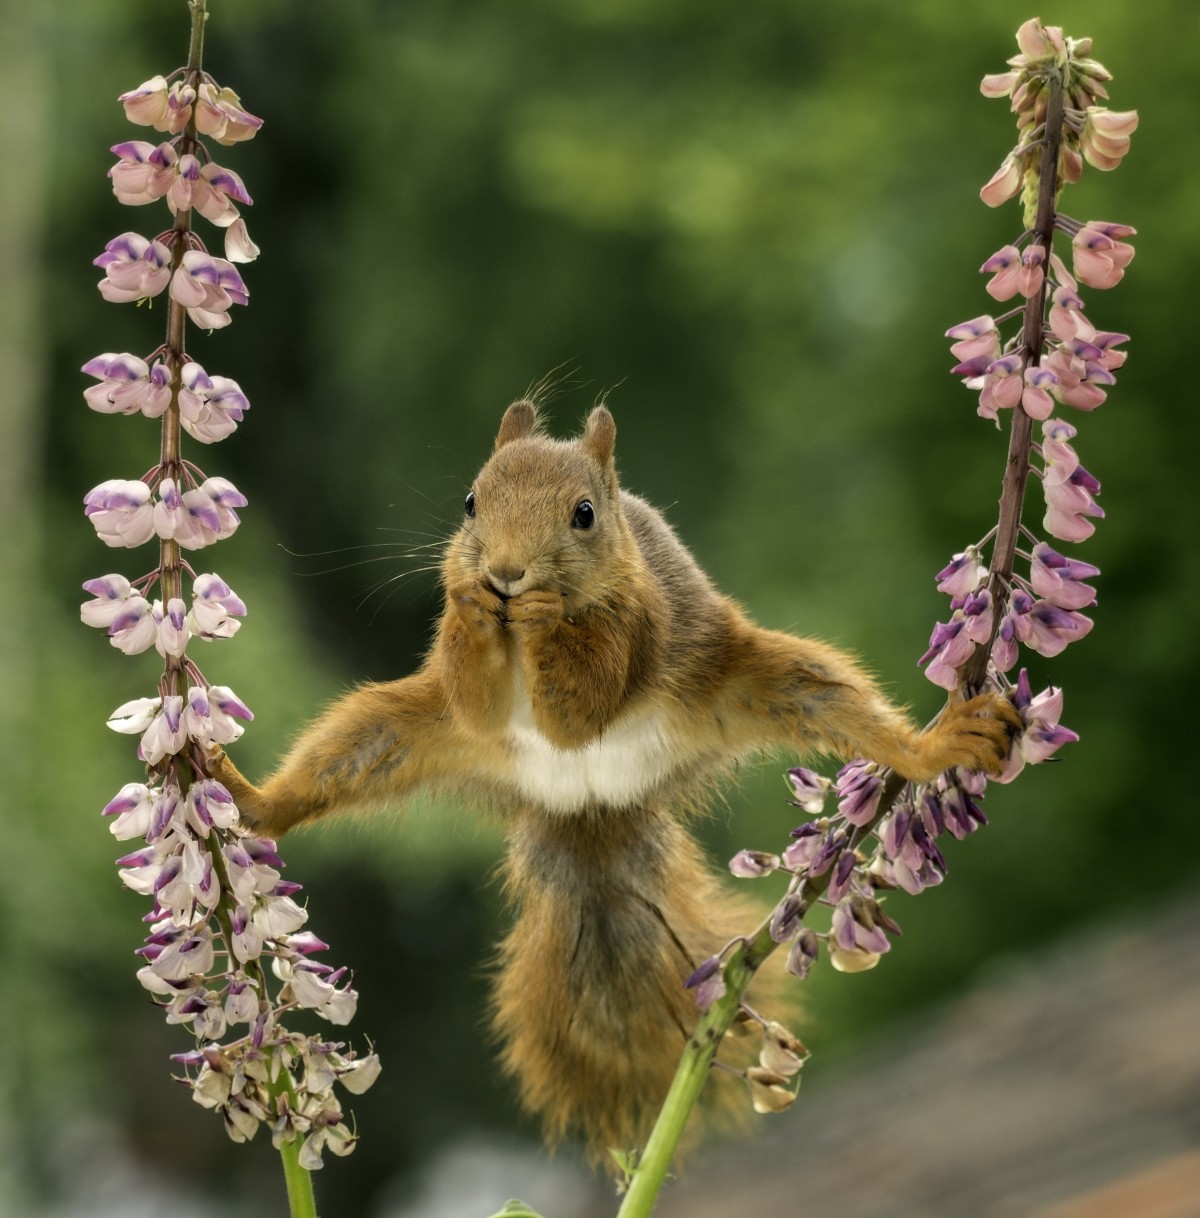 The morning stretch. An important part of any health-conscious squirrel's daily routine.